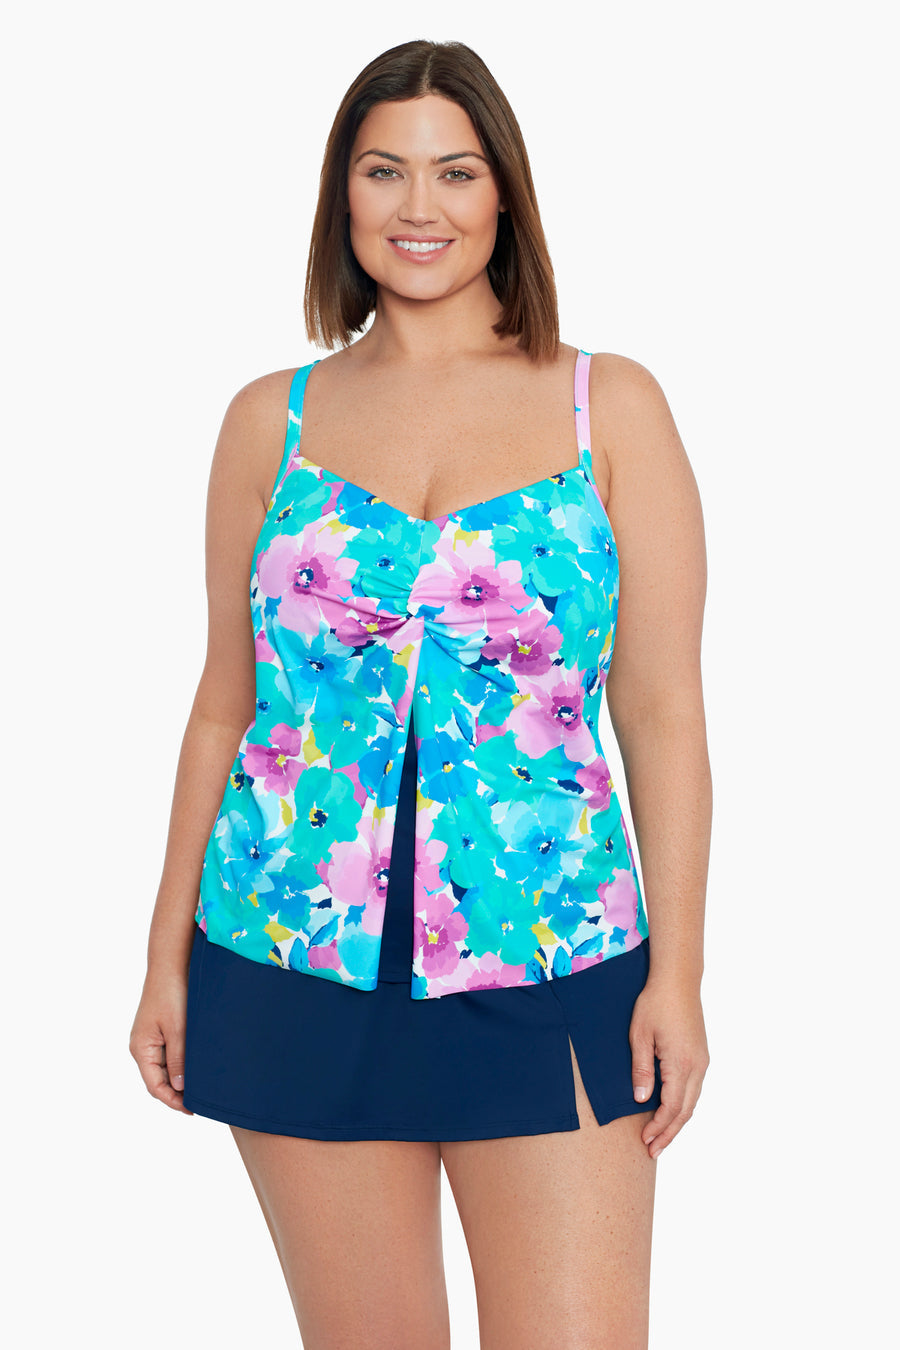 Swimsuits for All Women's Plus Size Flyaway Bandeau Tankini Top - 22, Multi  Tropical